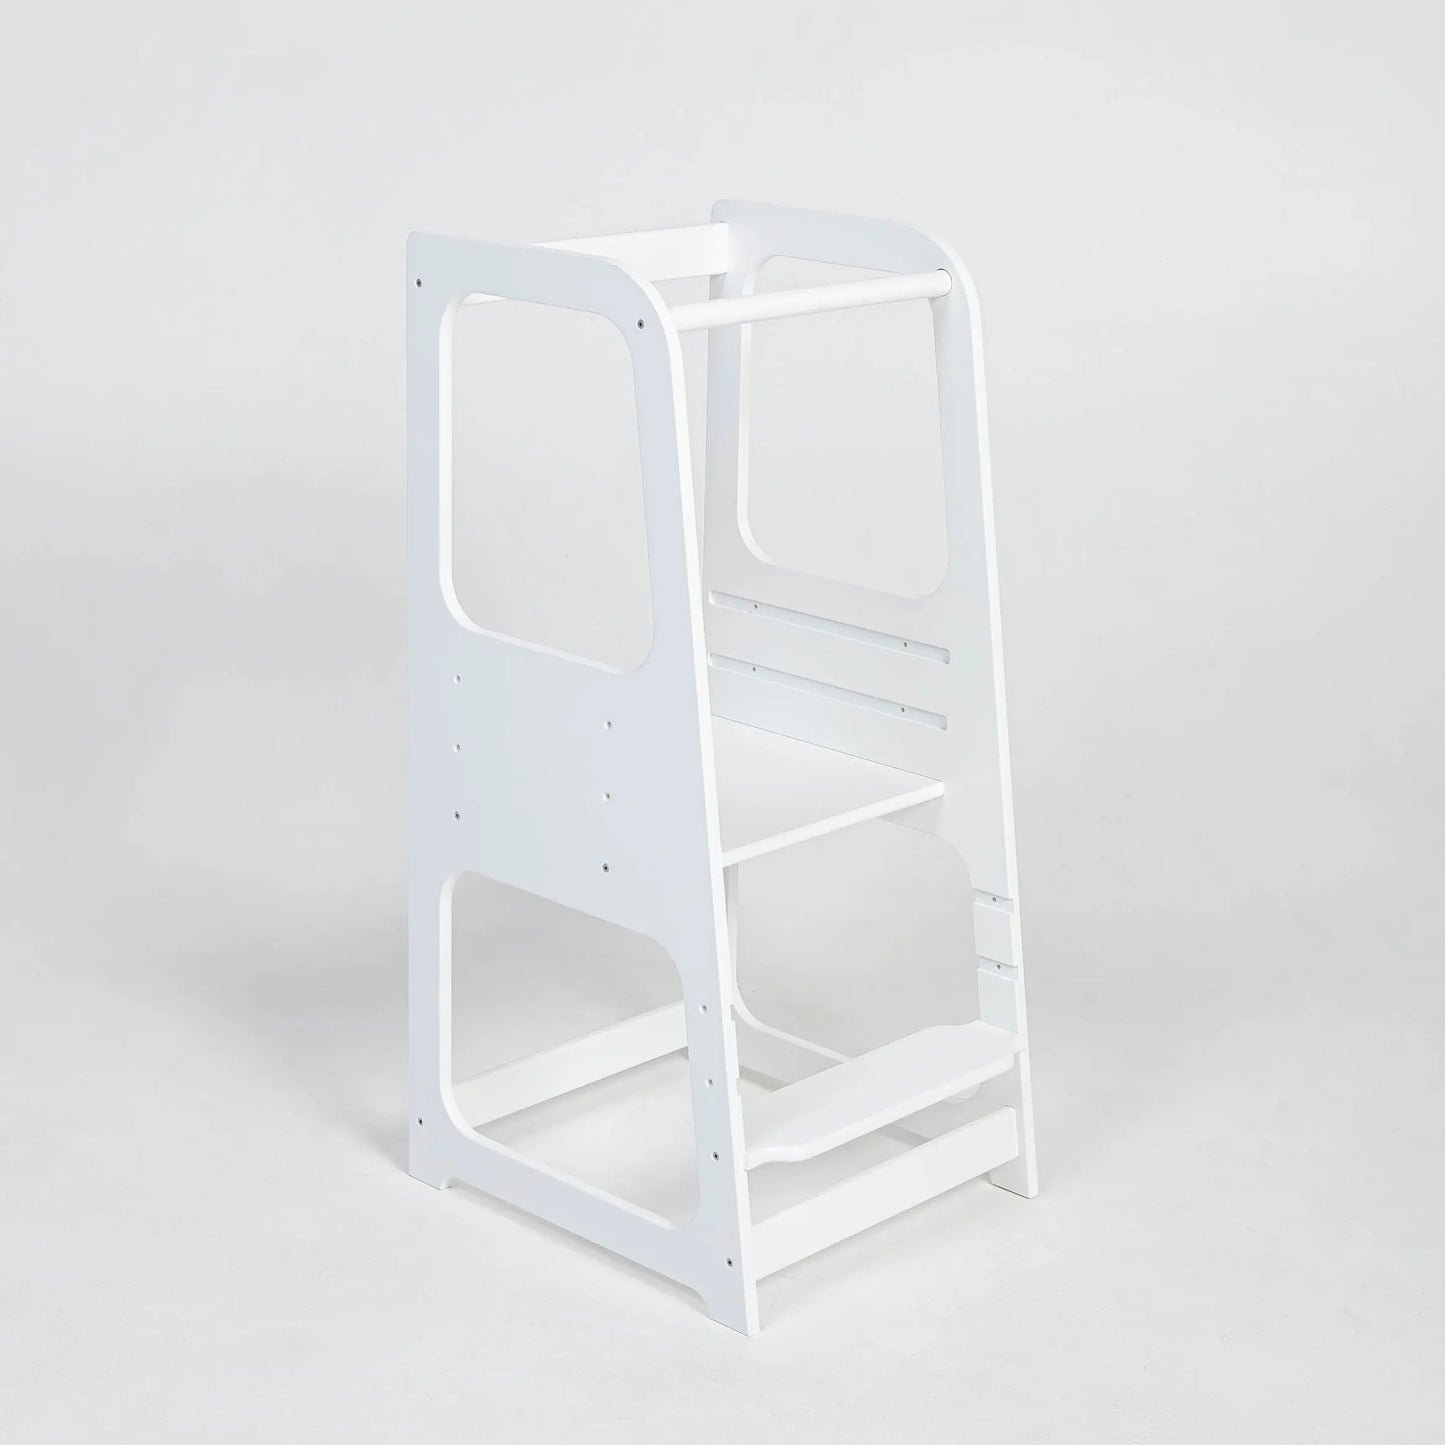 A Montessori Learning Tower Step Stool for Kids, featuring a white ladder with shelves and a chair, designed for safe and independent kitchen exploration by young learners.